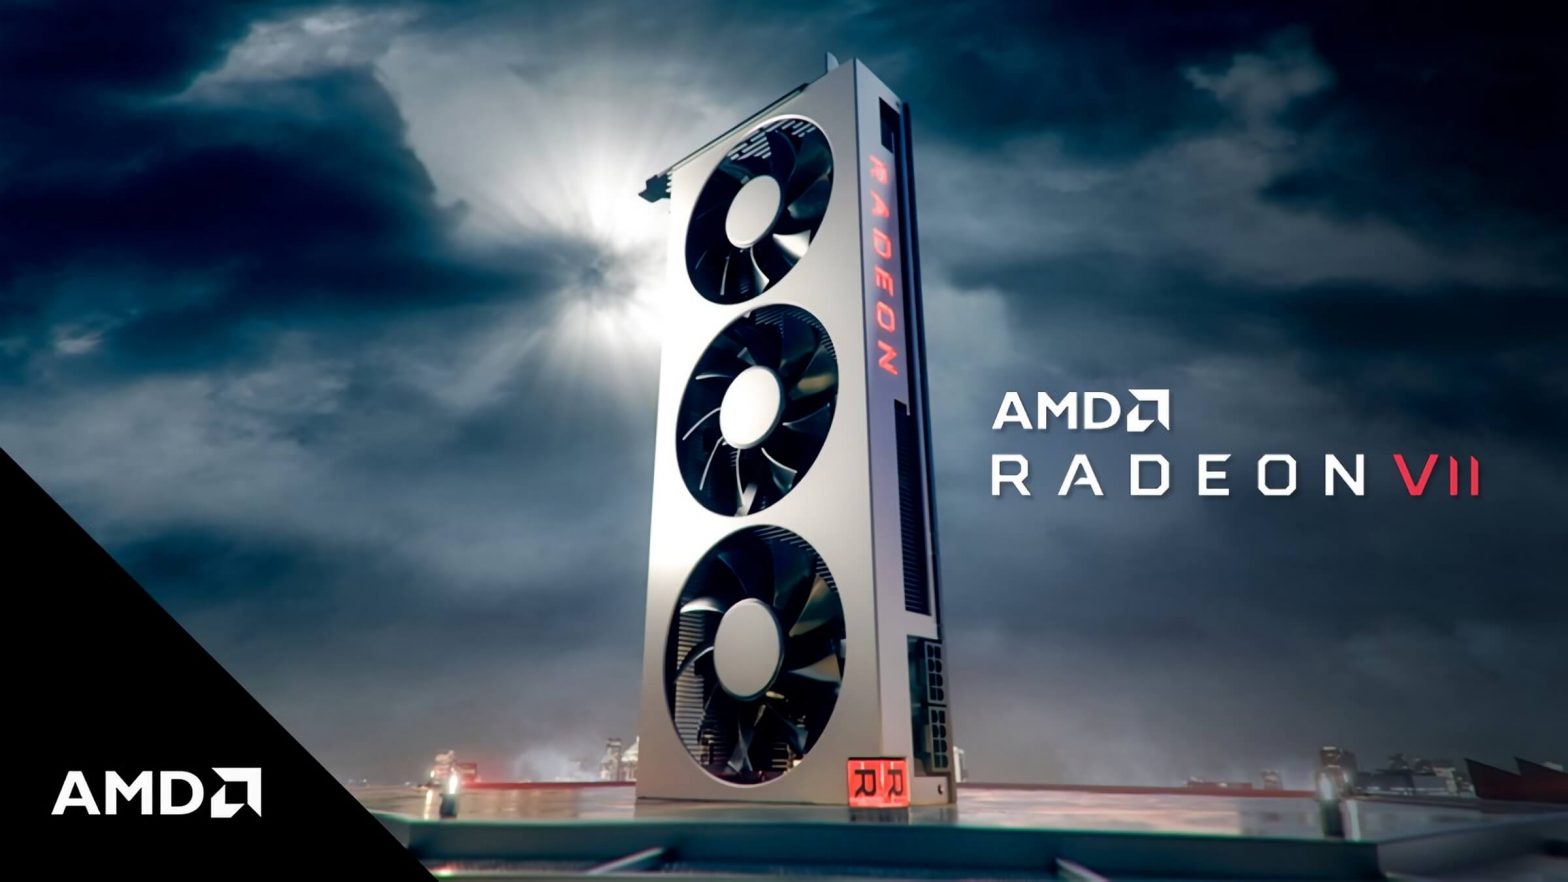 Radeon VII costs the same as RTX 2080, and performs worse?